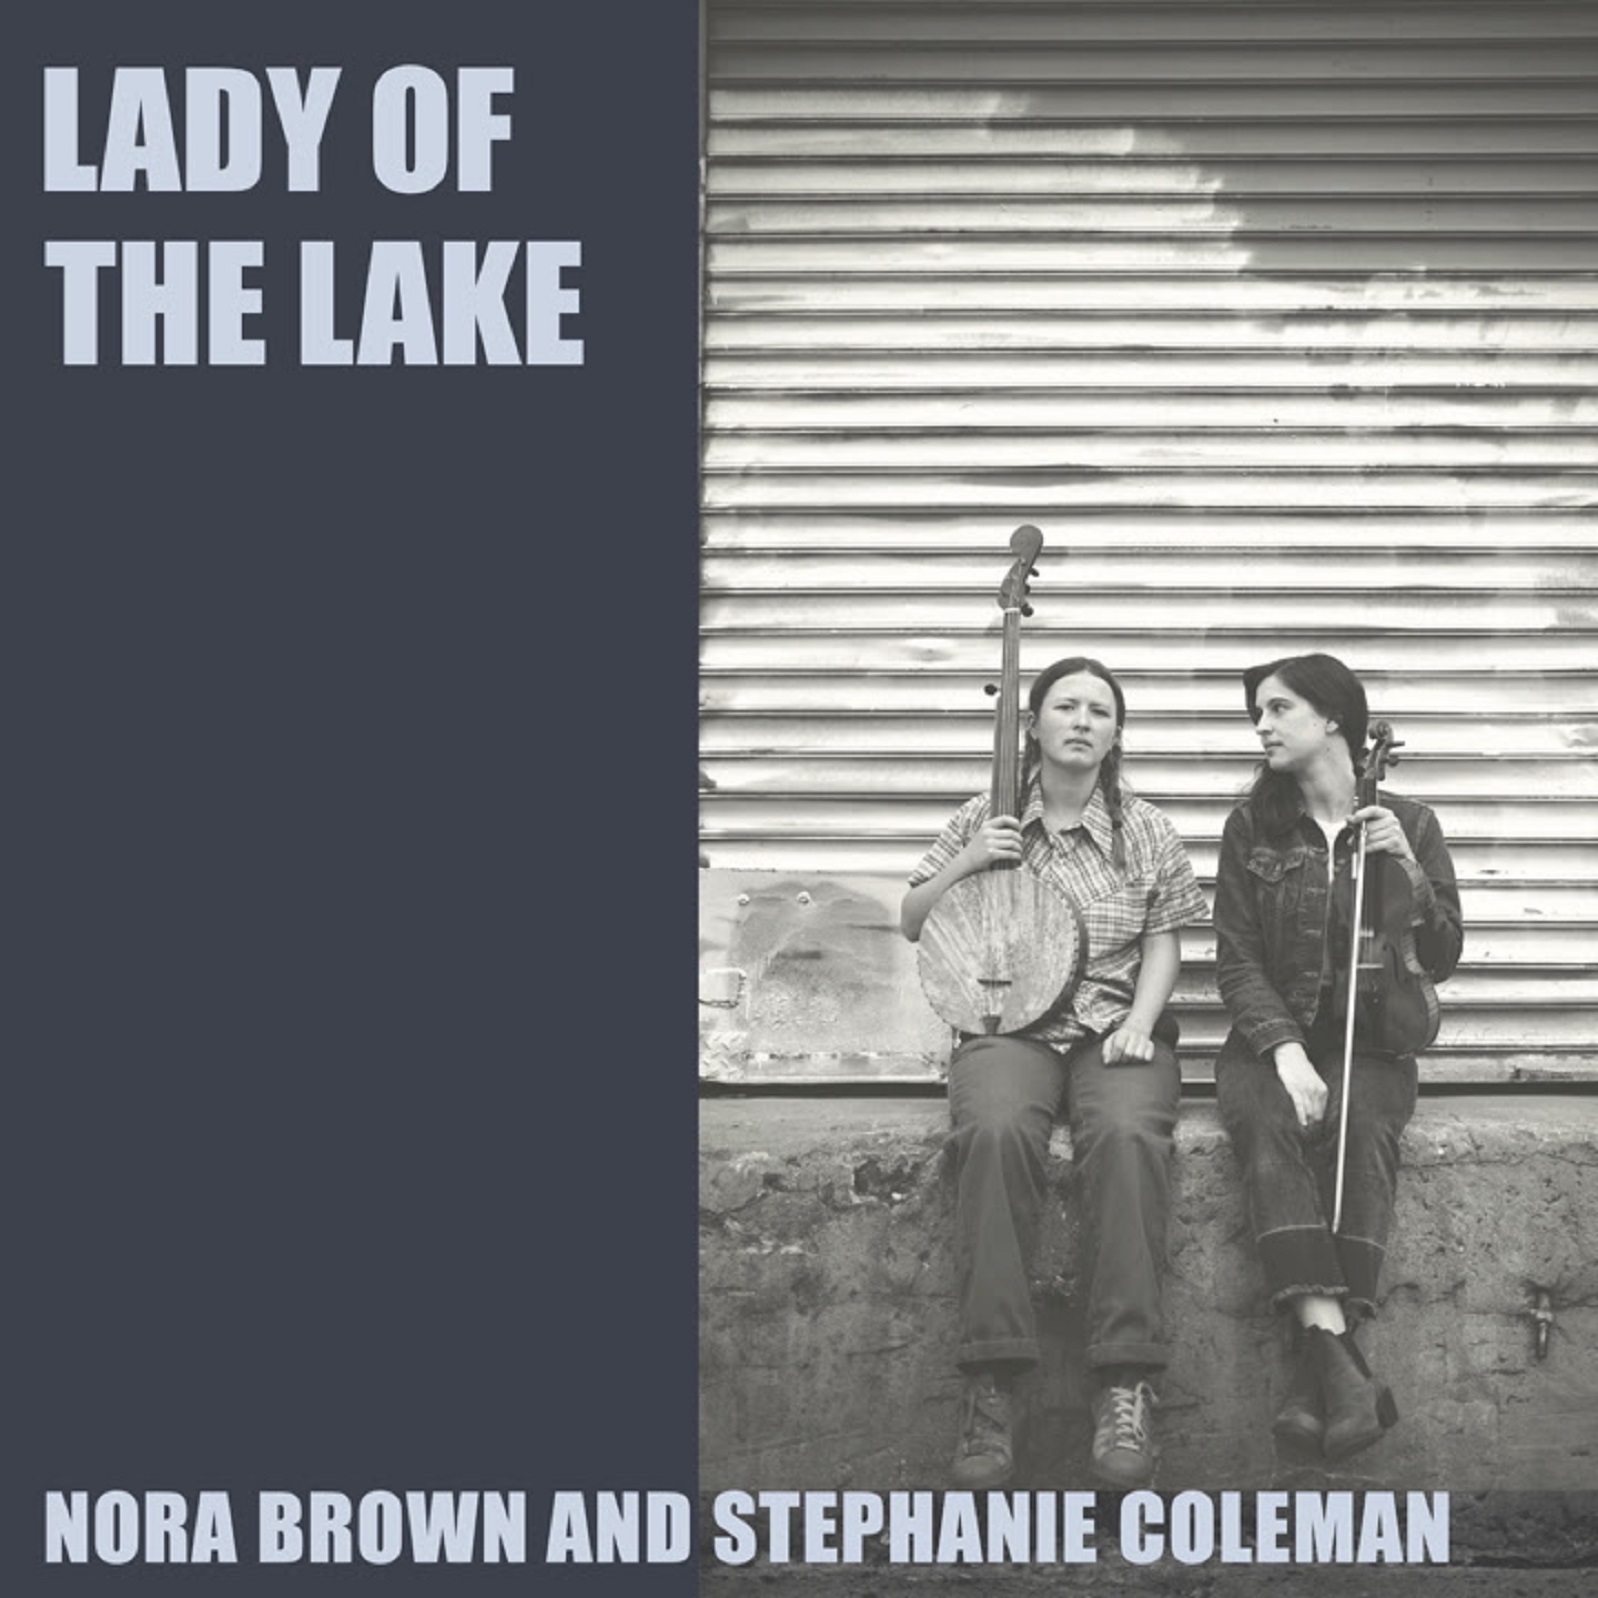 BANJOIST/VOCALIST NORA BROWN AND AWARD-WINNING FIDDLE PLAYER STEPHANIE COLEMAN TEAM UP FOR EP LADY OF THE LAKE